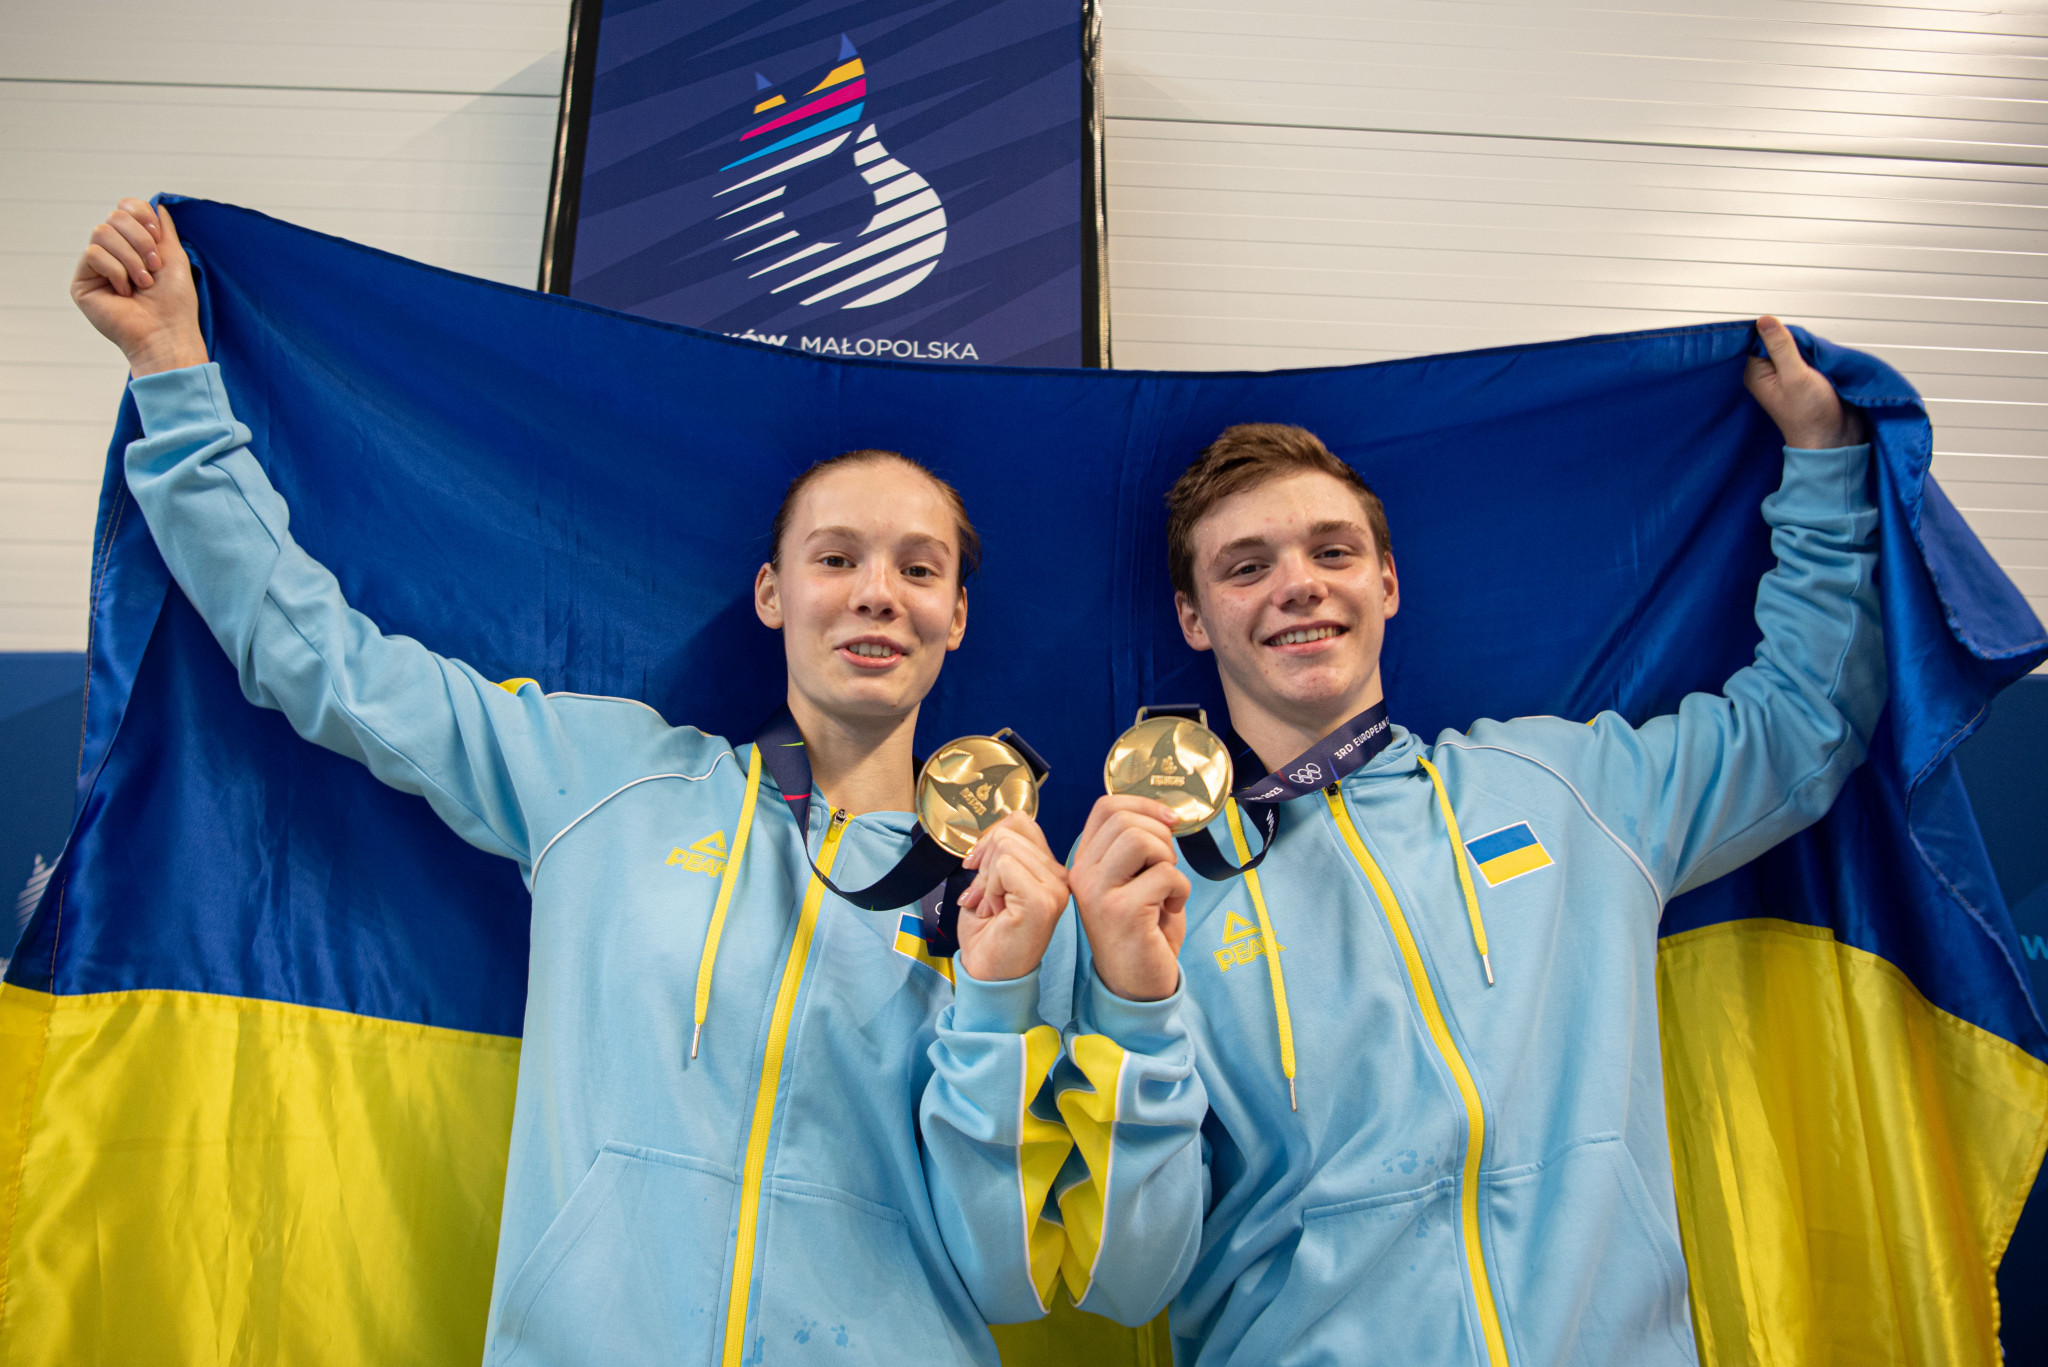 Ukraine are currently third on the medals table at Kraków-Małopolska 2023, where Russia and Belarus have been excluded ©Kraków-Małopolska 2023